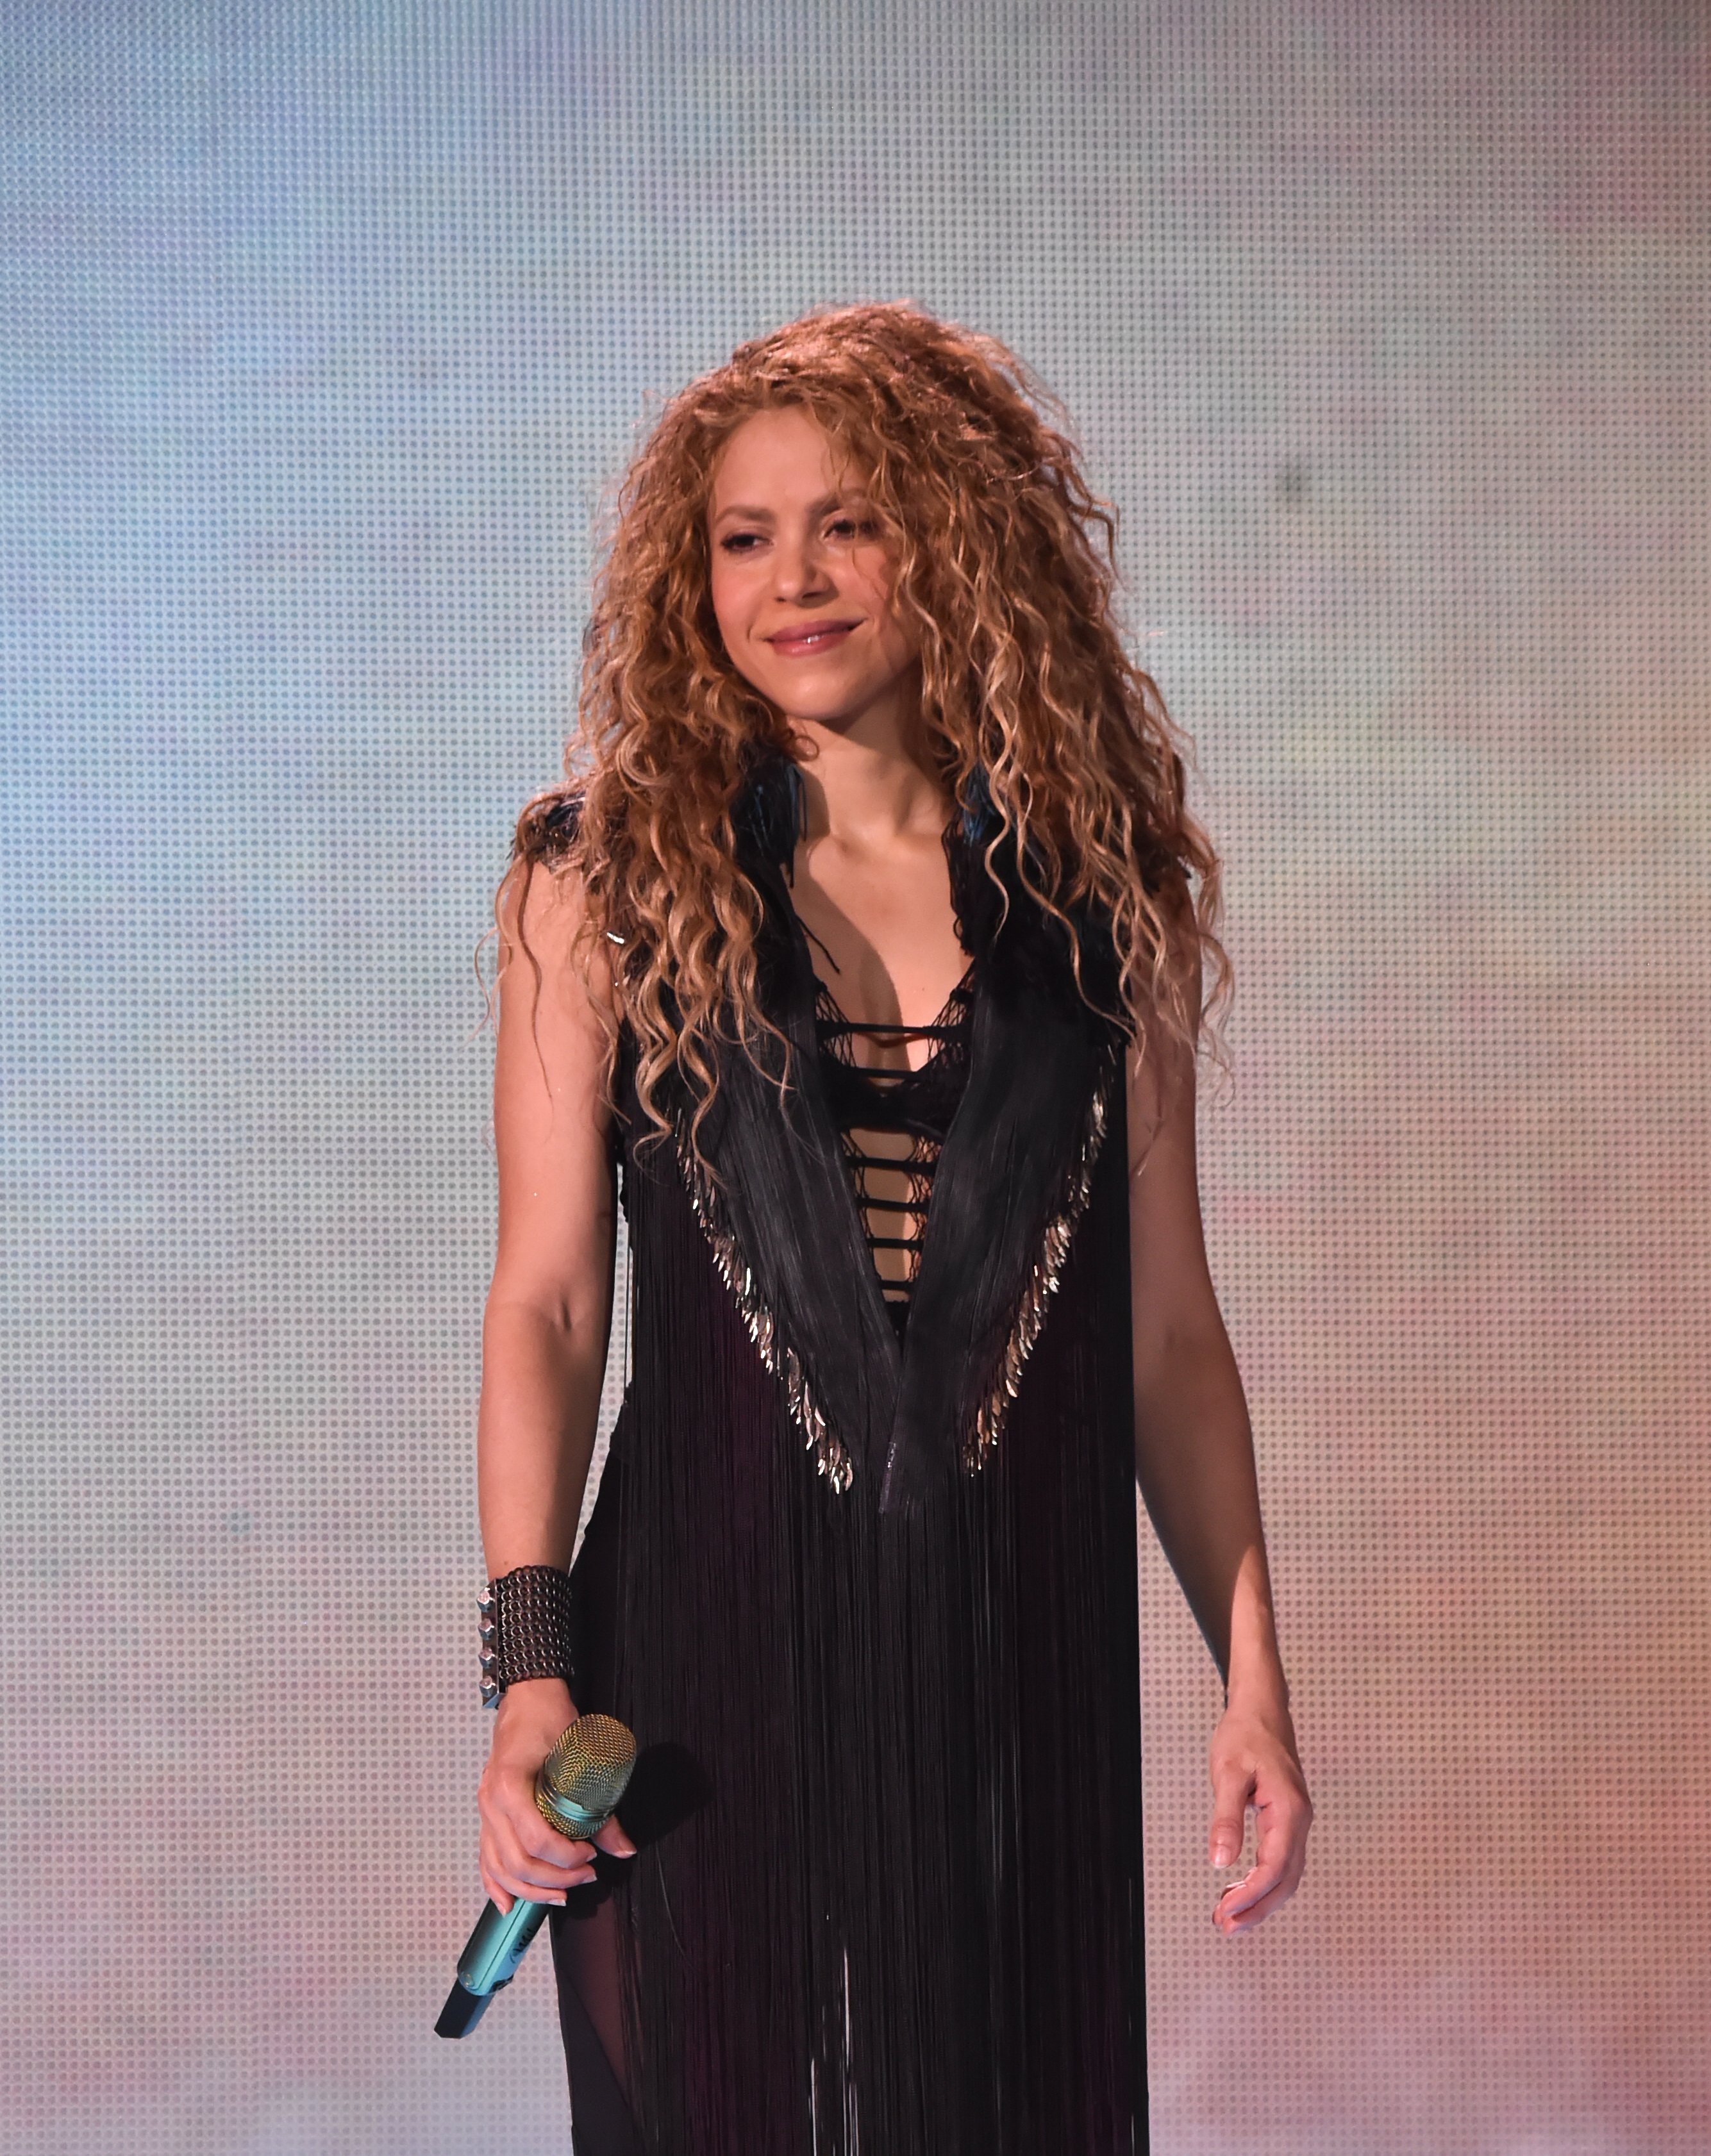 Shakira Kicks Off The North American Leg Of Her El Dorado World Tour at United Center on August 3, 2018 in Chicago, Illinois. | Source: Getty Images